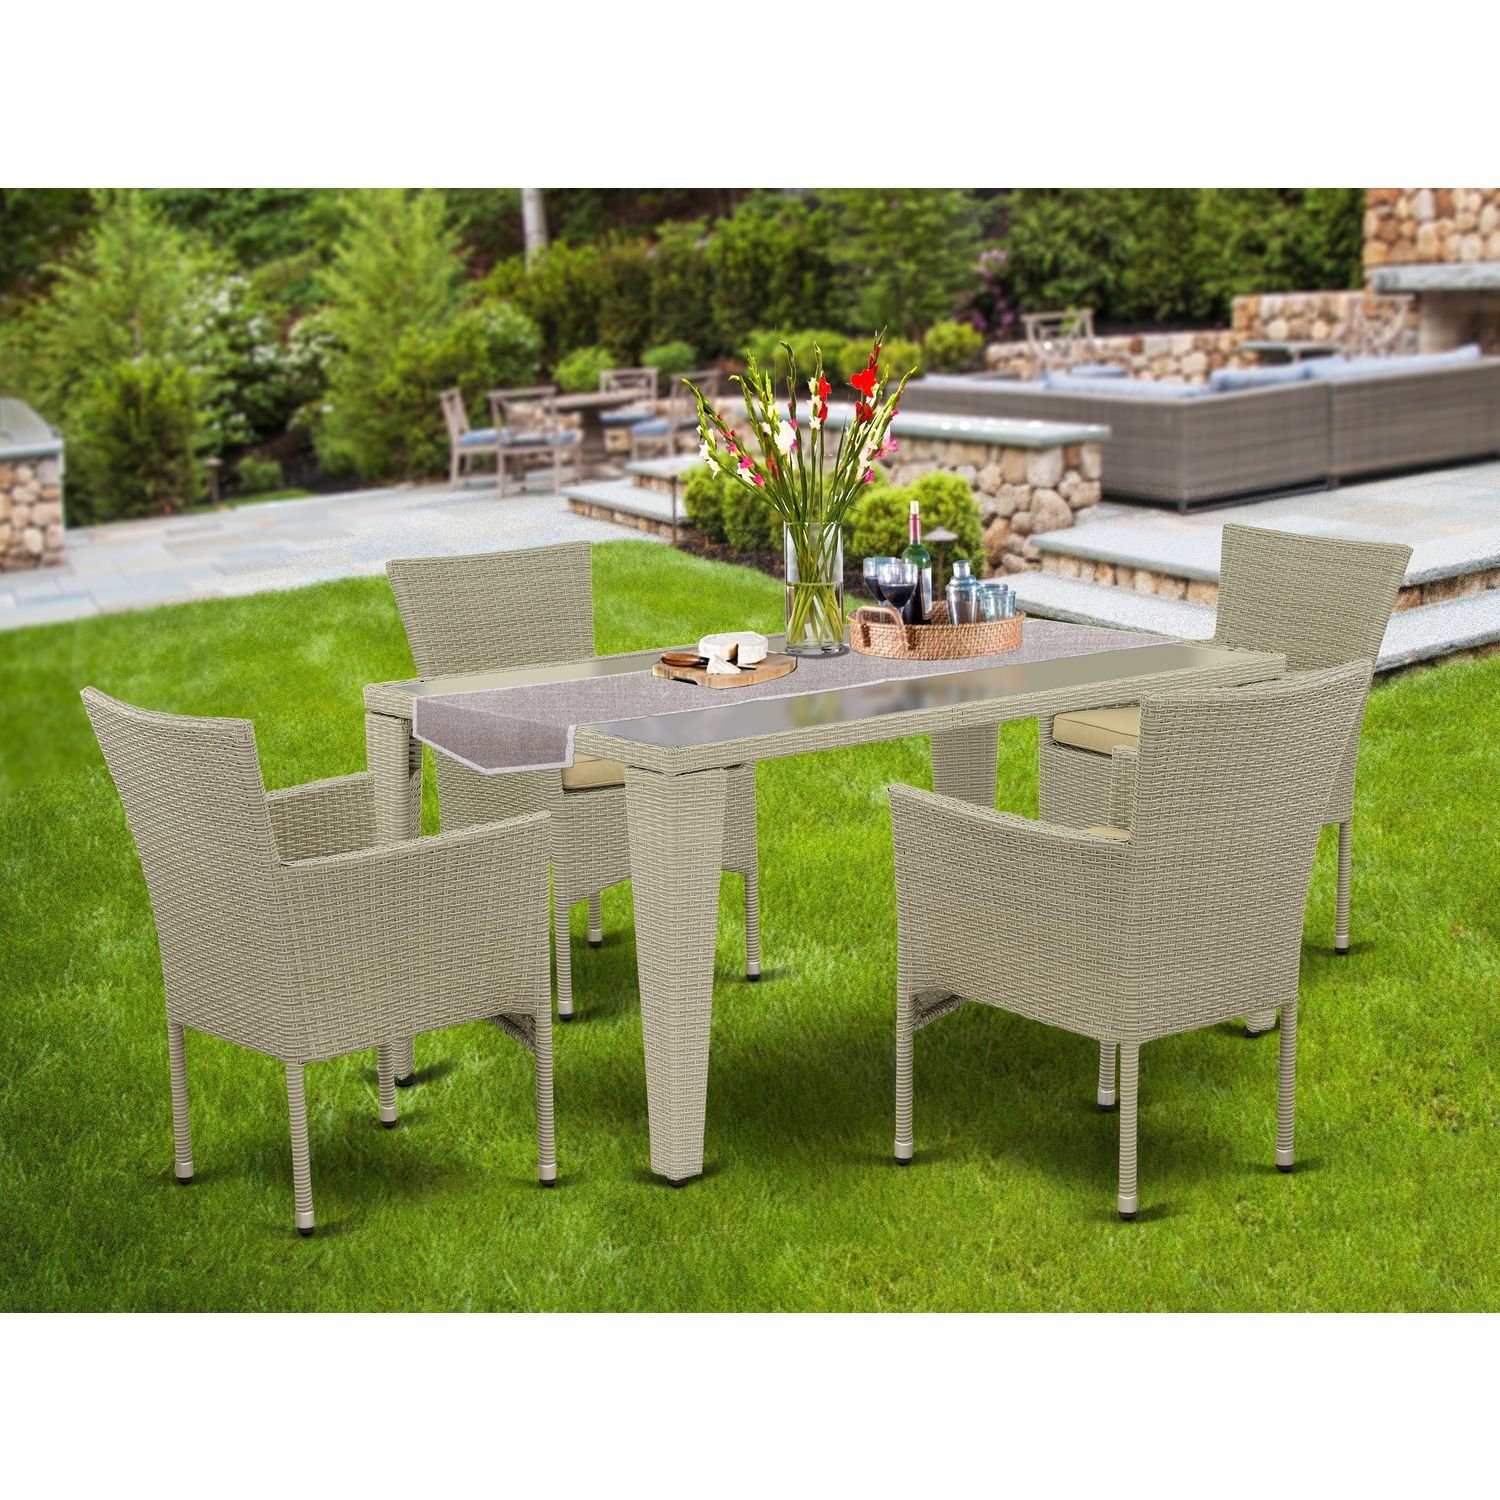 East West Furniture Gudhjem 5-piece Patio Dining Set with Armchairs in Natural - image 1 of 4